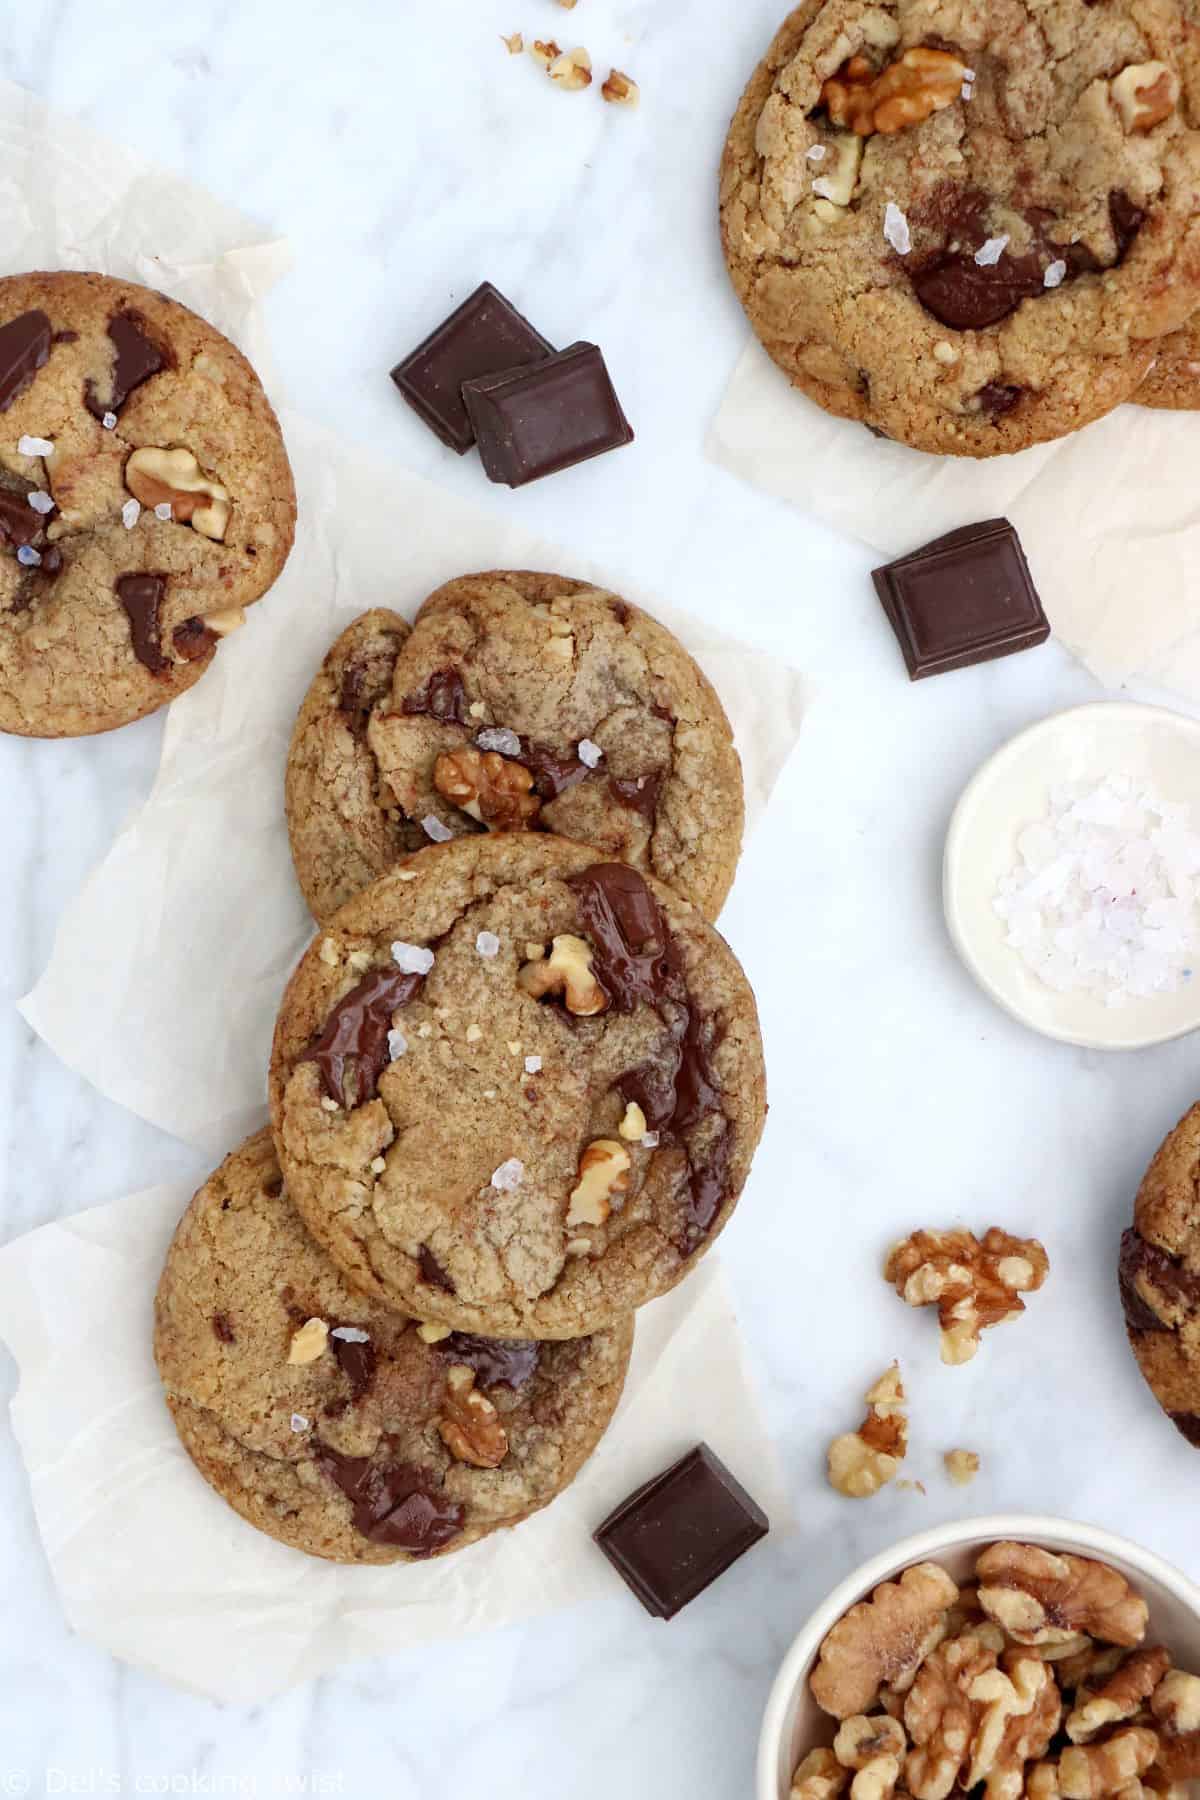 Brown Butter Walnut Chocolate Chip Cookies - Del's cooking twist